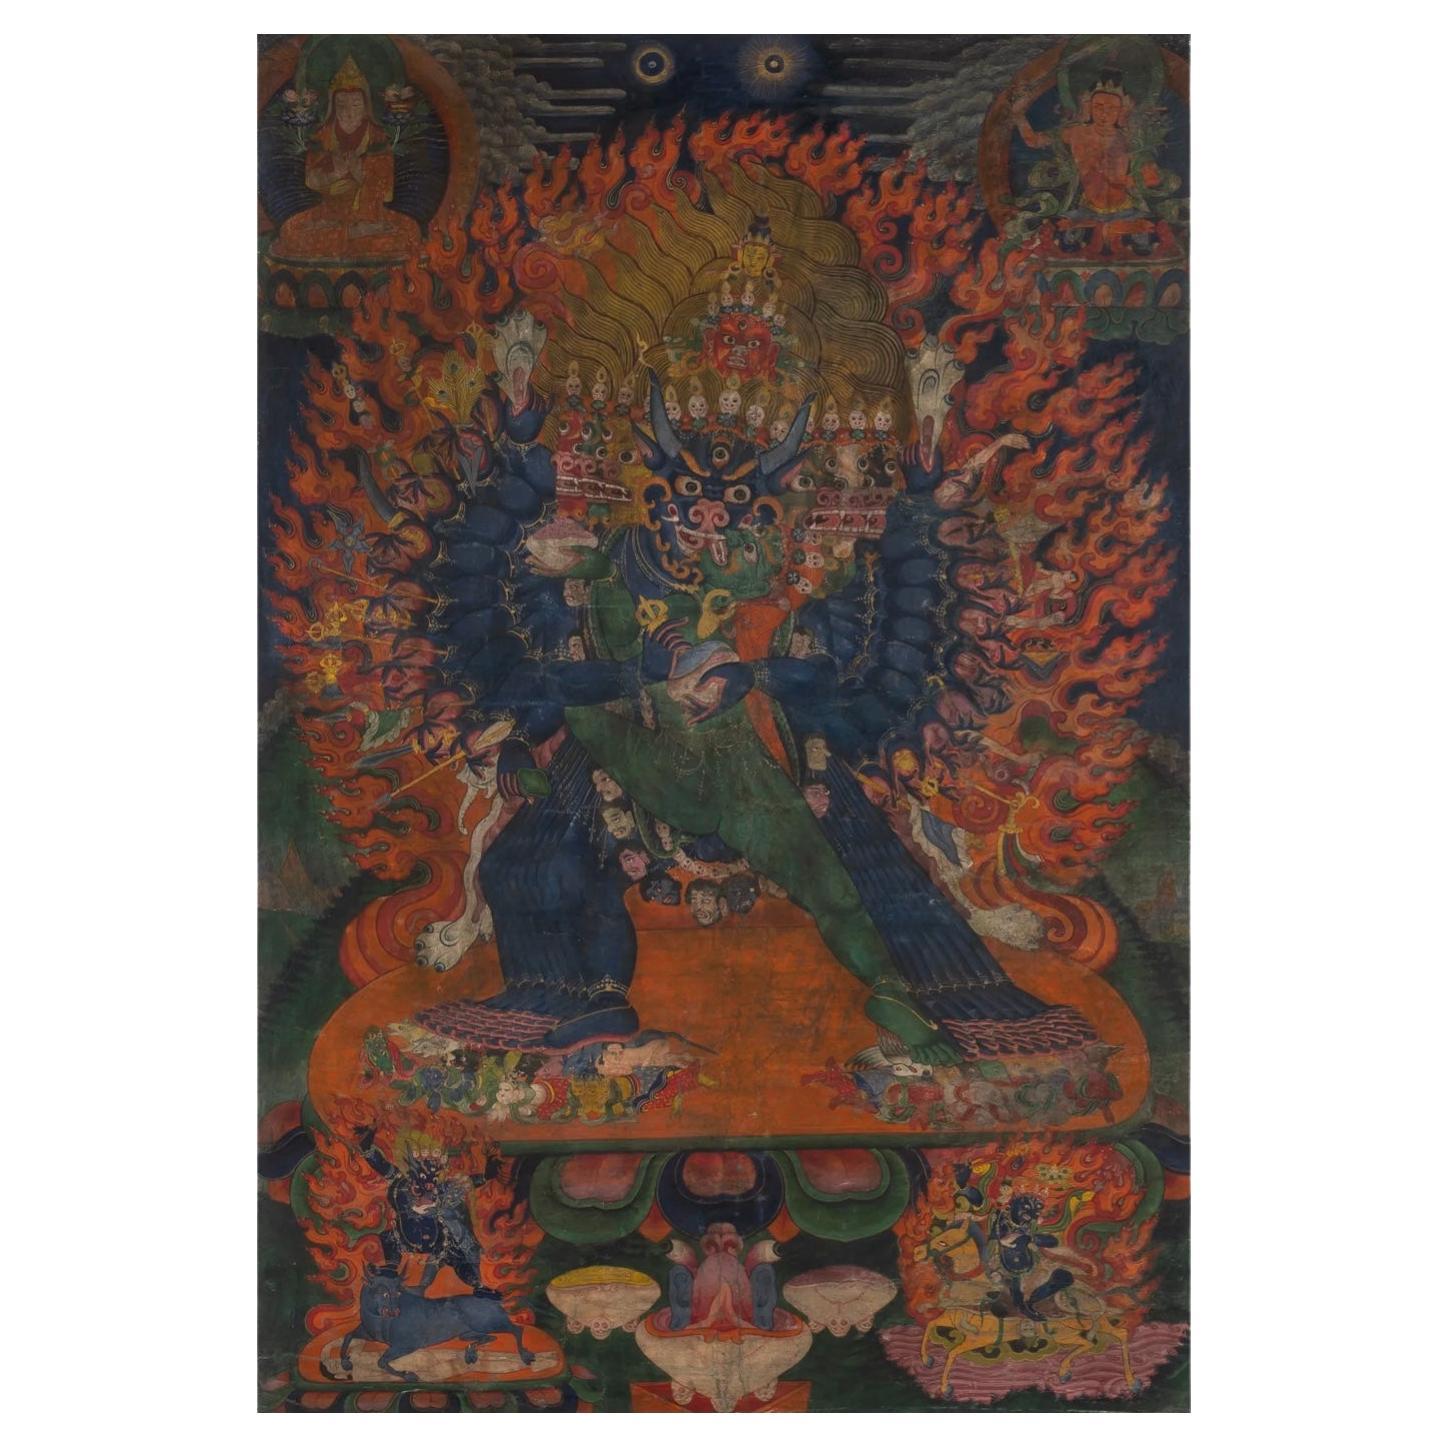 A Tibetan Yamantaka Thangka 17th/18th Century

The thangka is coloured and gilt with the fierce deity depicted striding in alidhasana surrounded by a fiery aureole. Numerous other deities and lamas are depicted surrounding the central figure. Detail